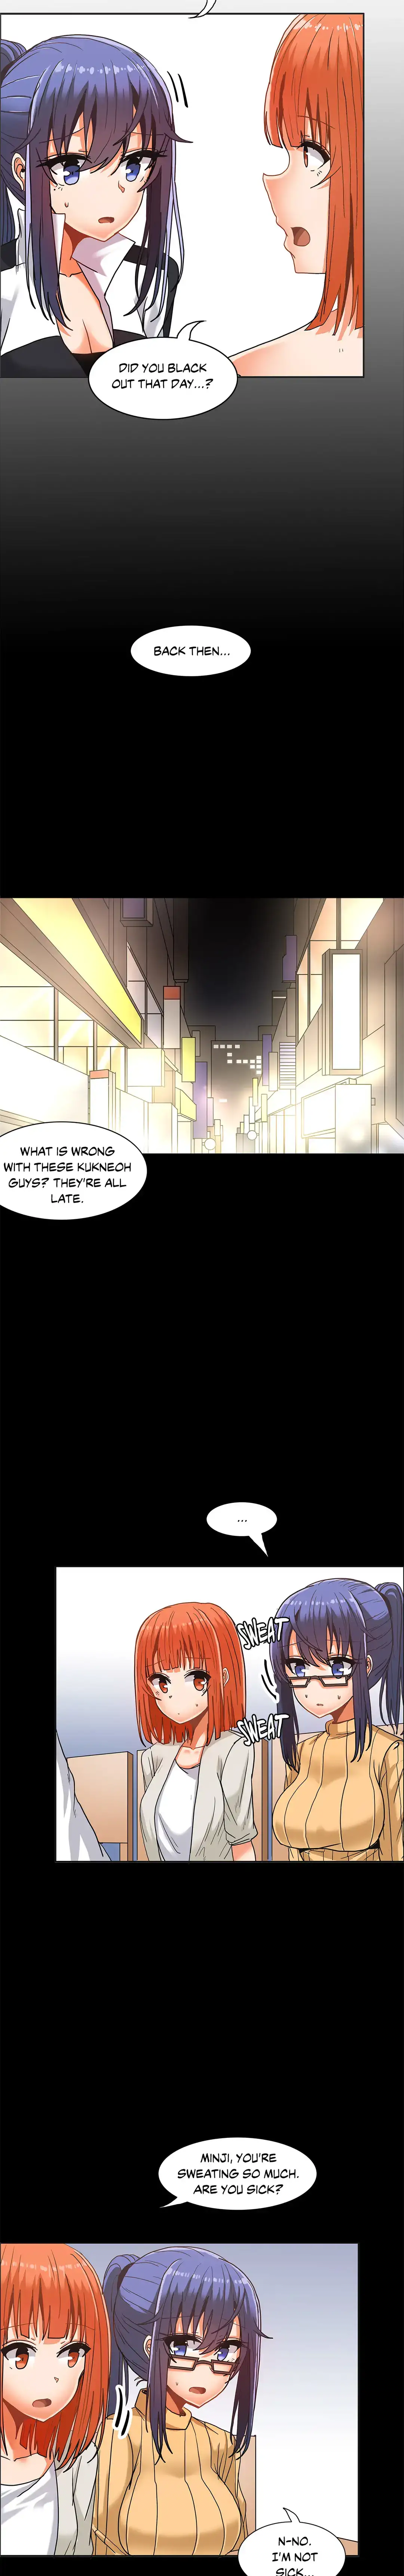 The Girl That Wet the Wall - Chapter 20 Page 5